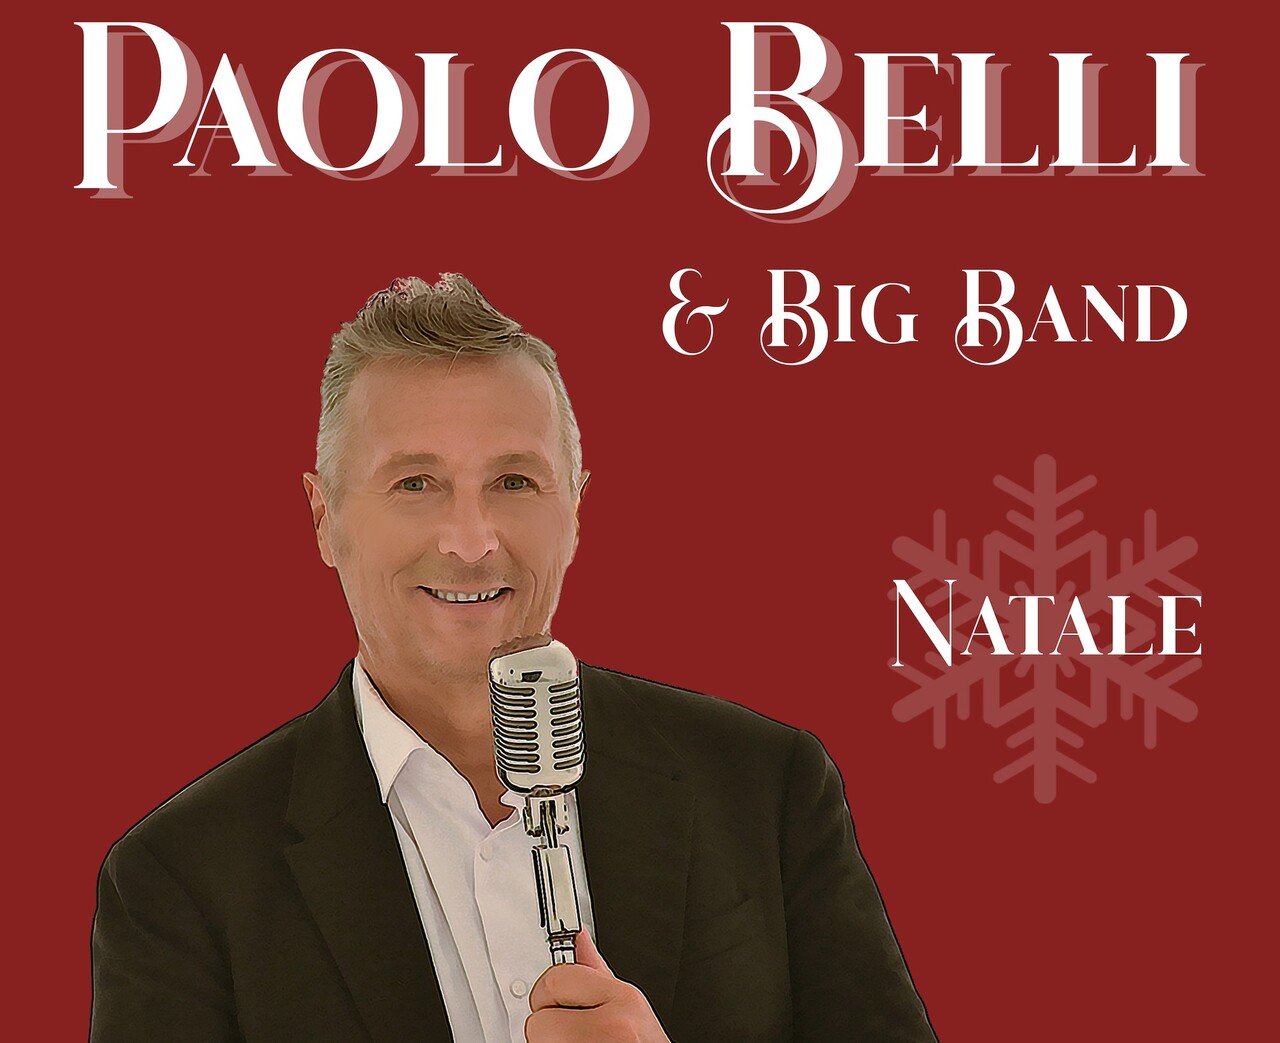 Paolo Belli Natale Cover